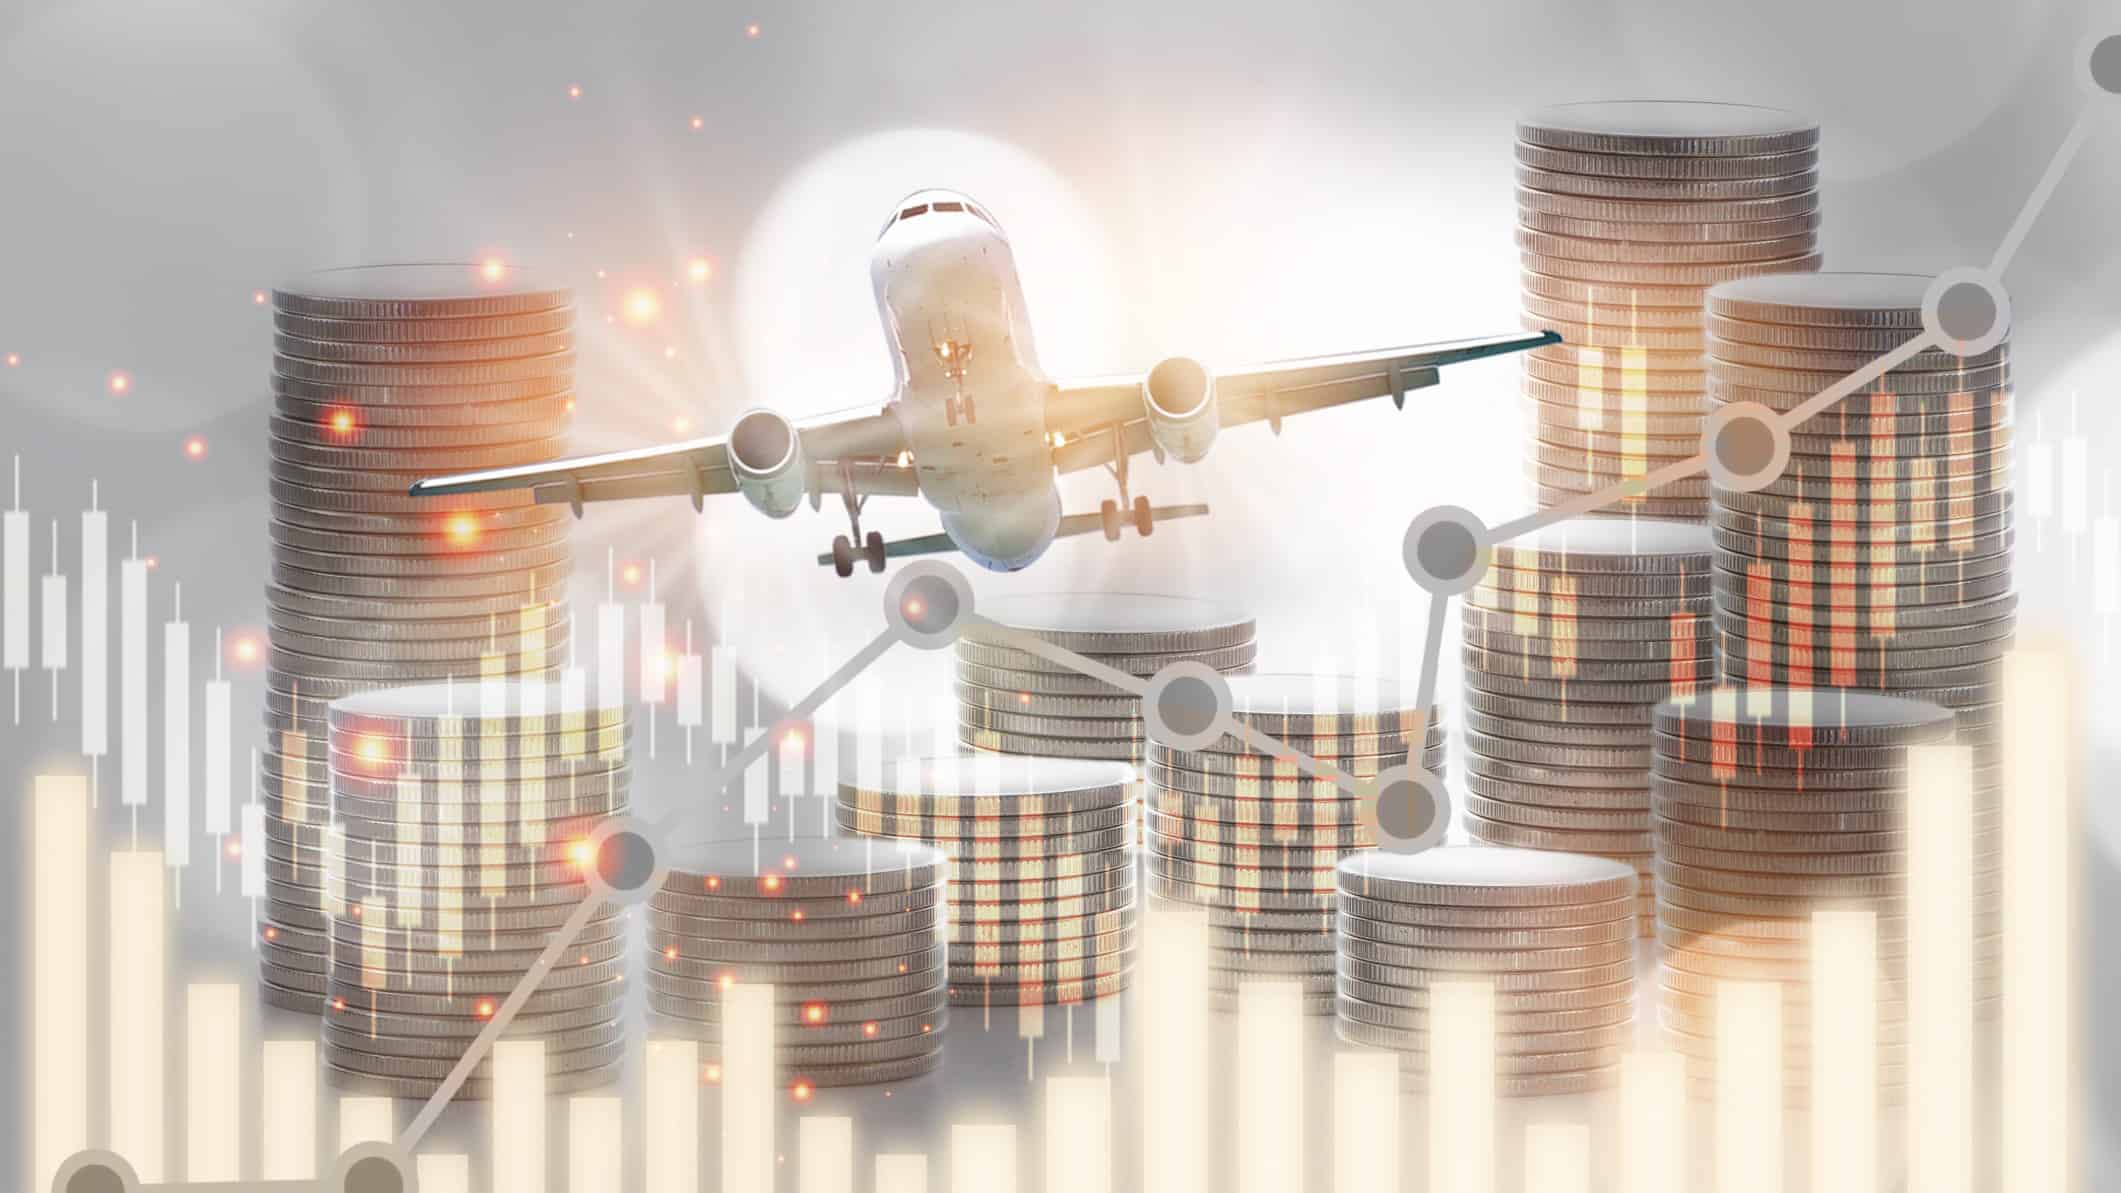 Concept image of a plane flying above a graph and stacks of coins.